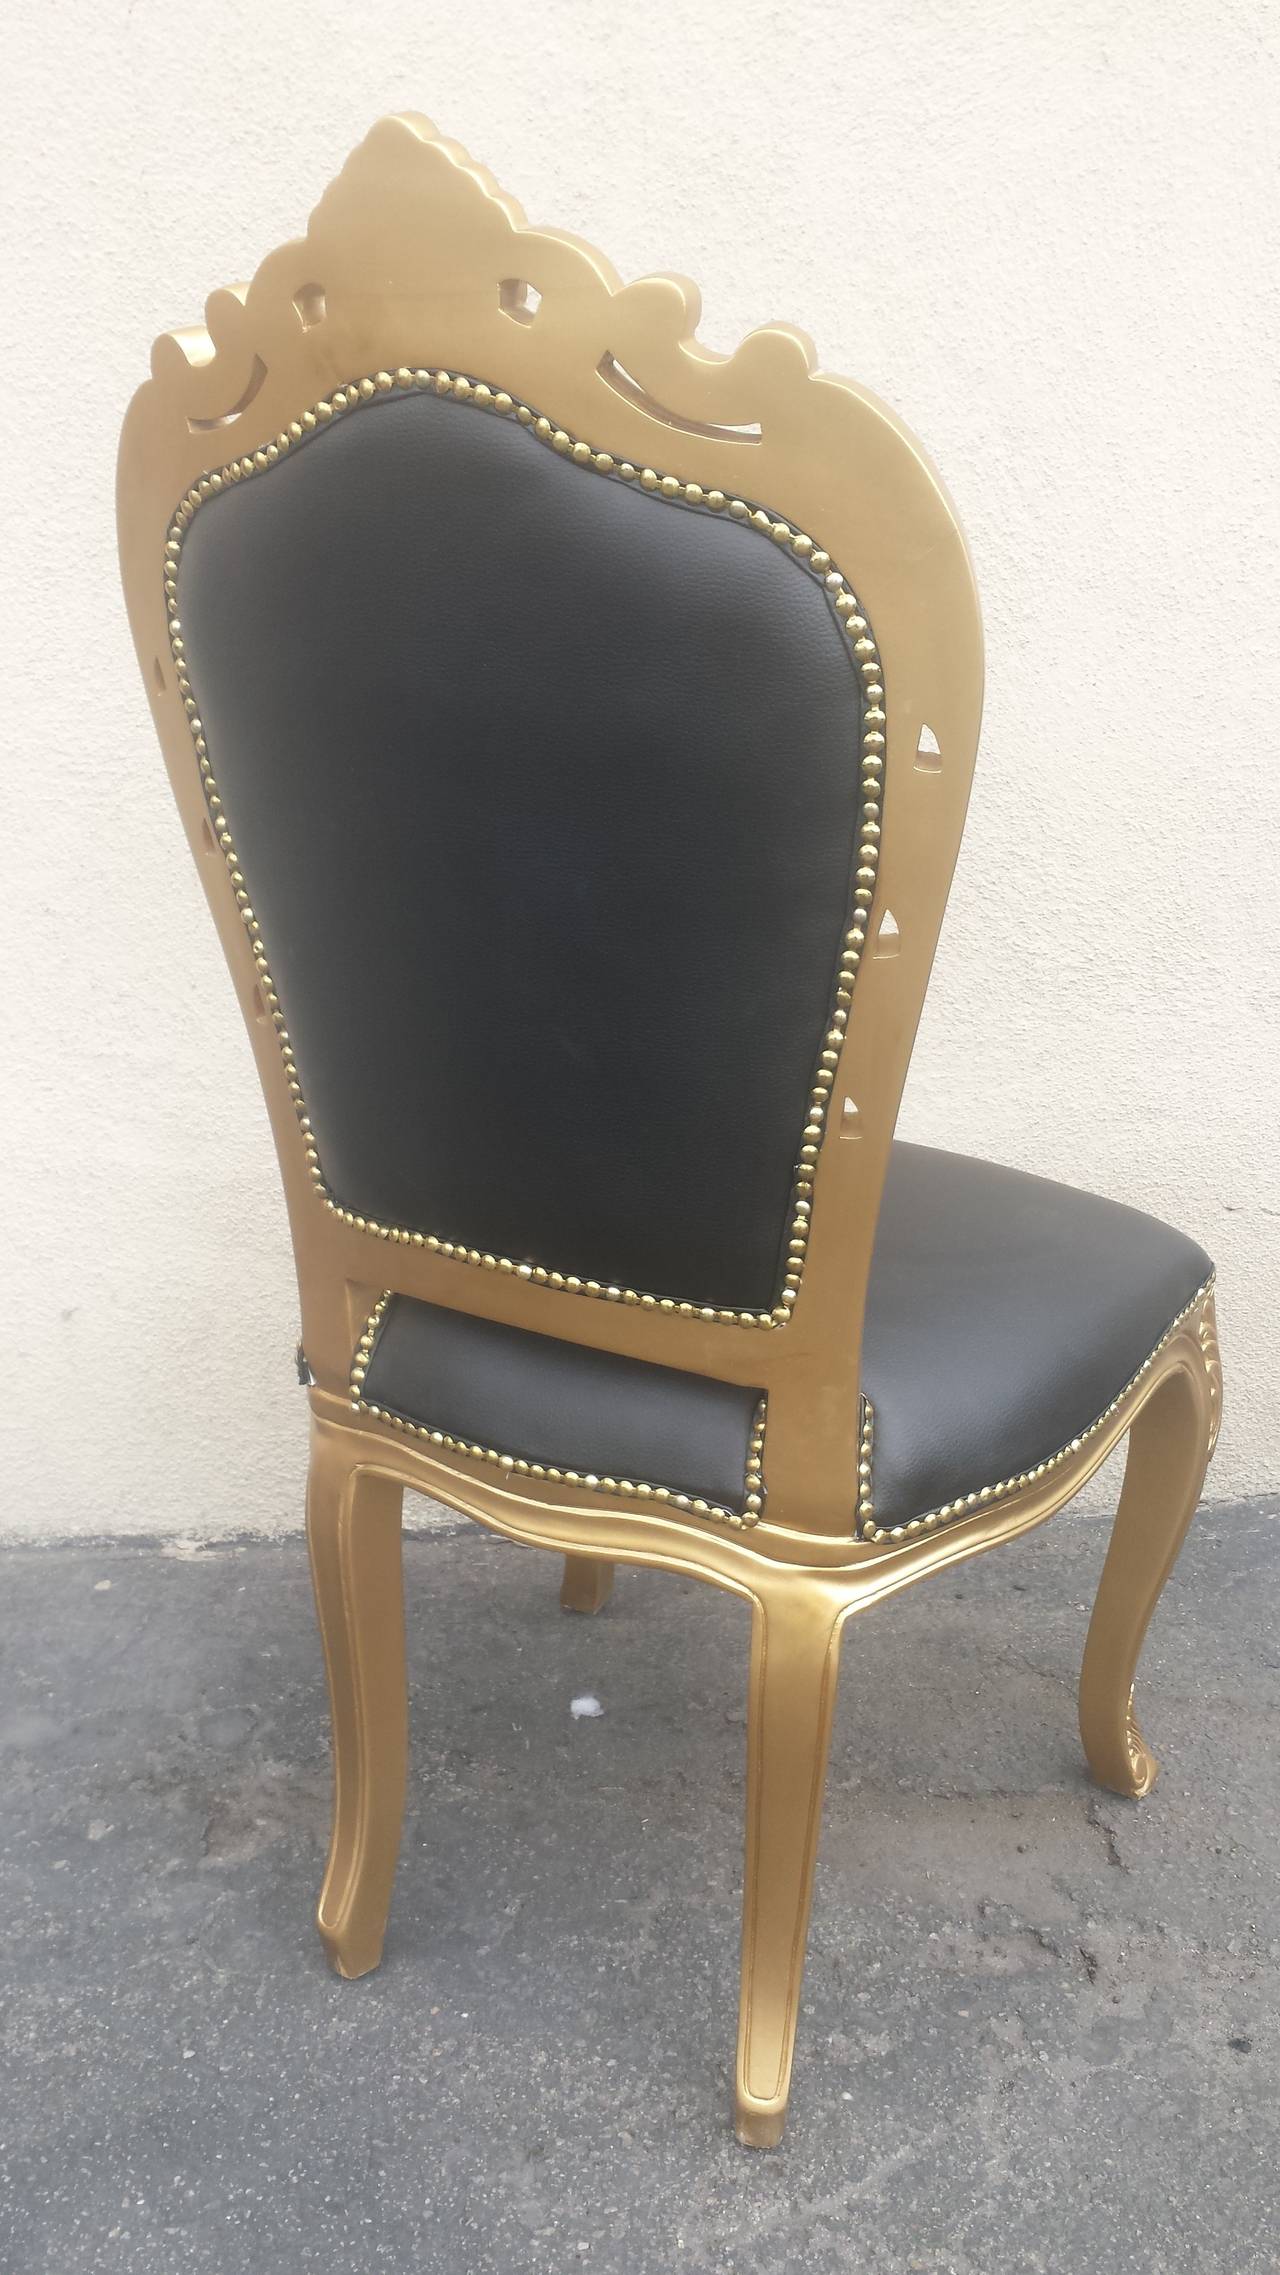 Hand carved French style side chair and dining chairs. Finished in gold and deep tufted back in faux leather.
Newly painted and upholstered. 
Two chairs are available.